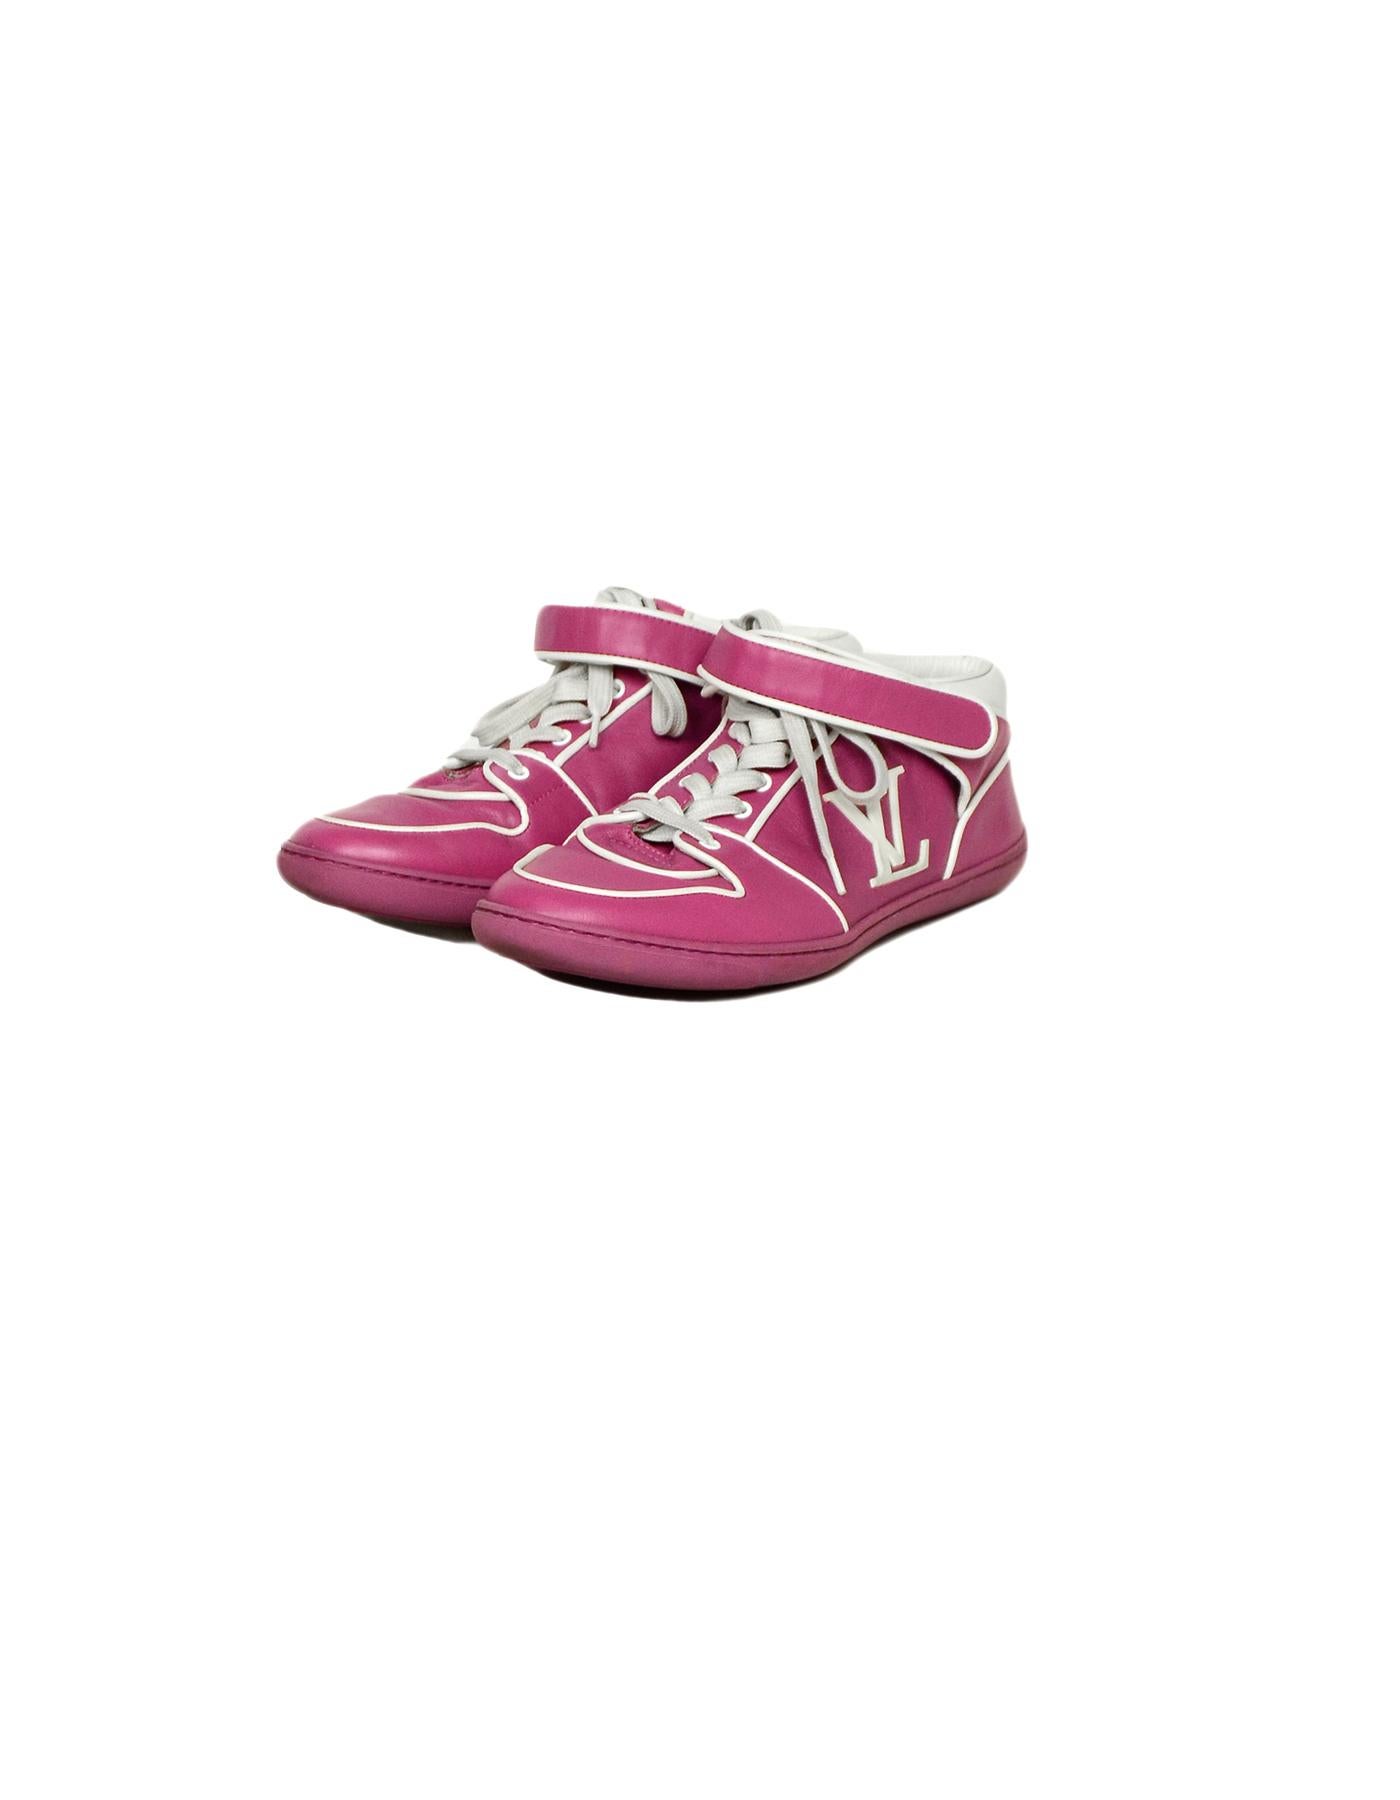 Louis Vuitton Pink Leather Logo Sneakers sz 36.5

Made In: Italy
Color: Pink, White
Materials: Leather
Closure/Opening: Lace-up
Overall Condition: Very good pre-owned condition, wear on sole and heels, marks on velcro cover.
Includes: Two